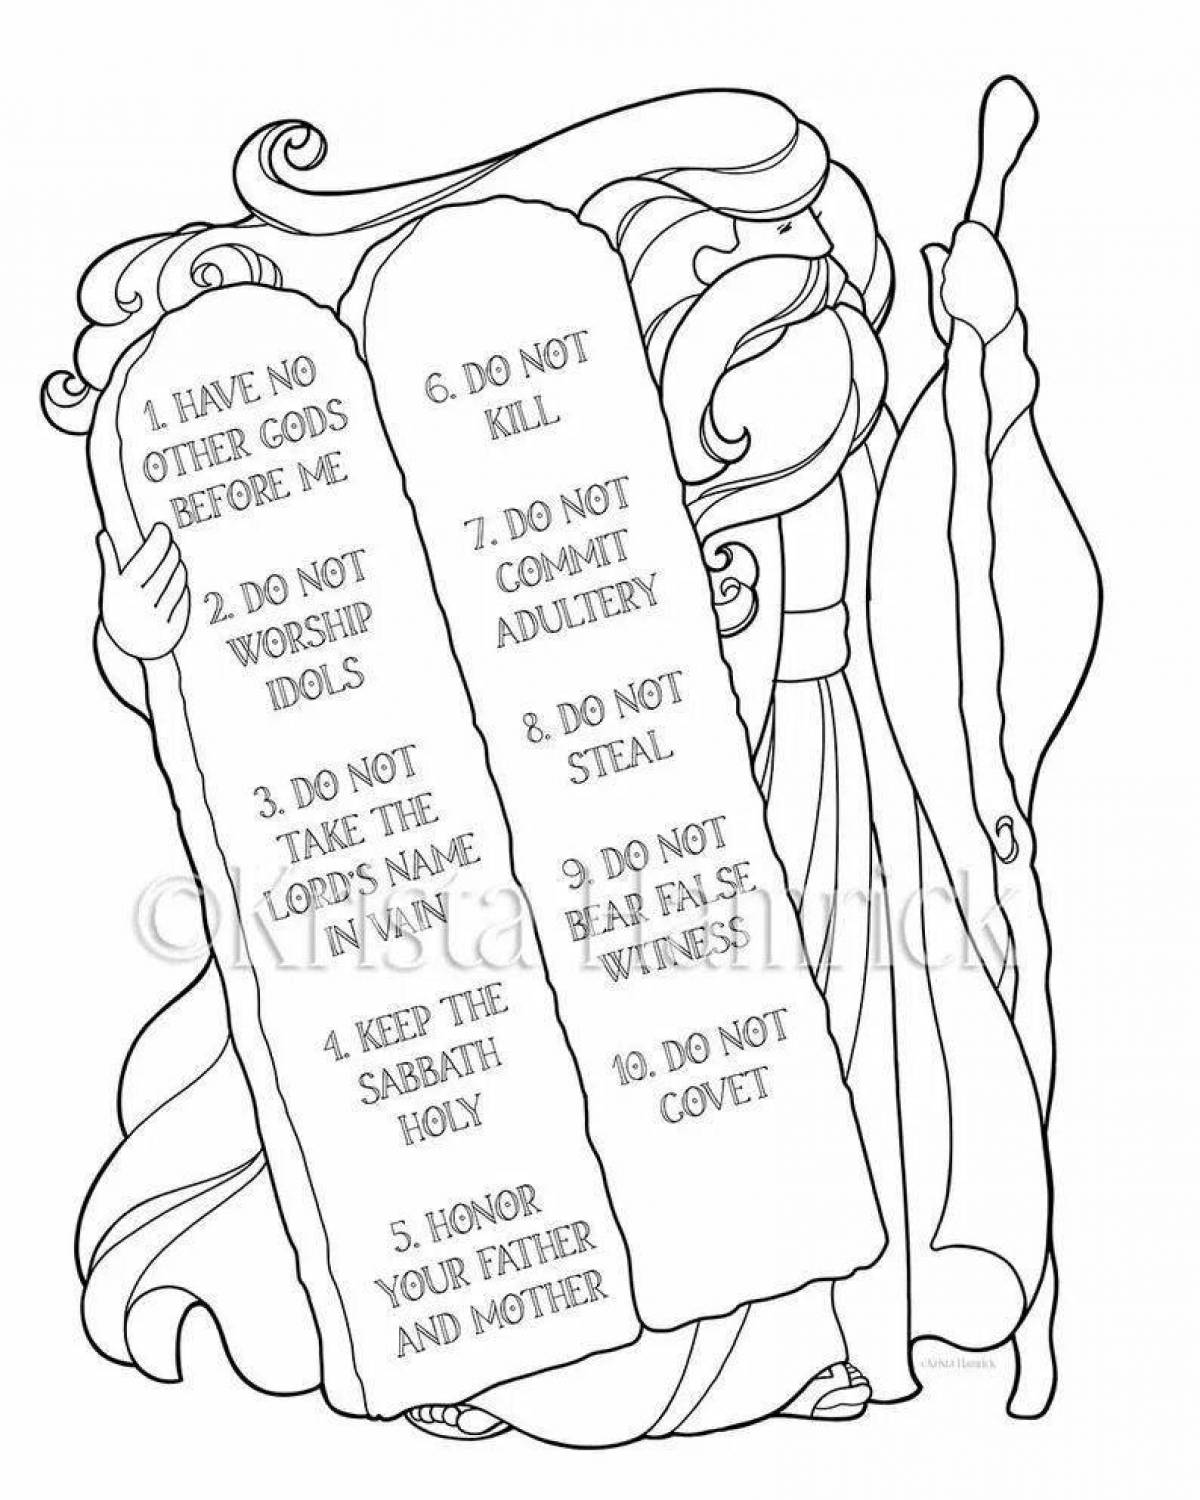 Outstanding 10 commandments coloring page